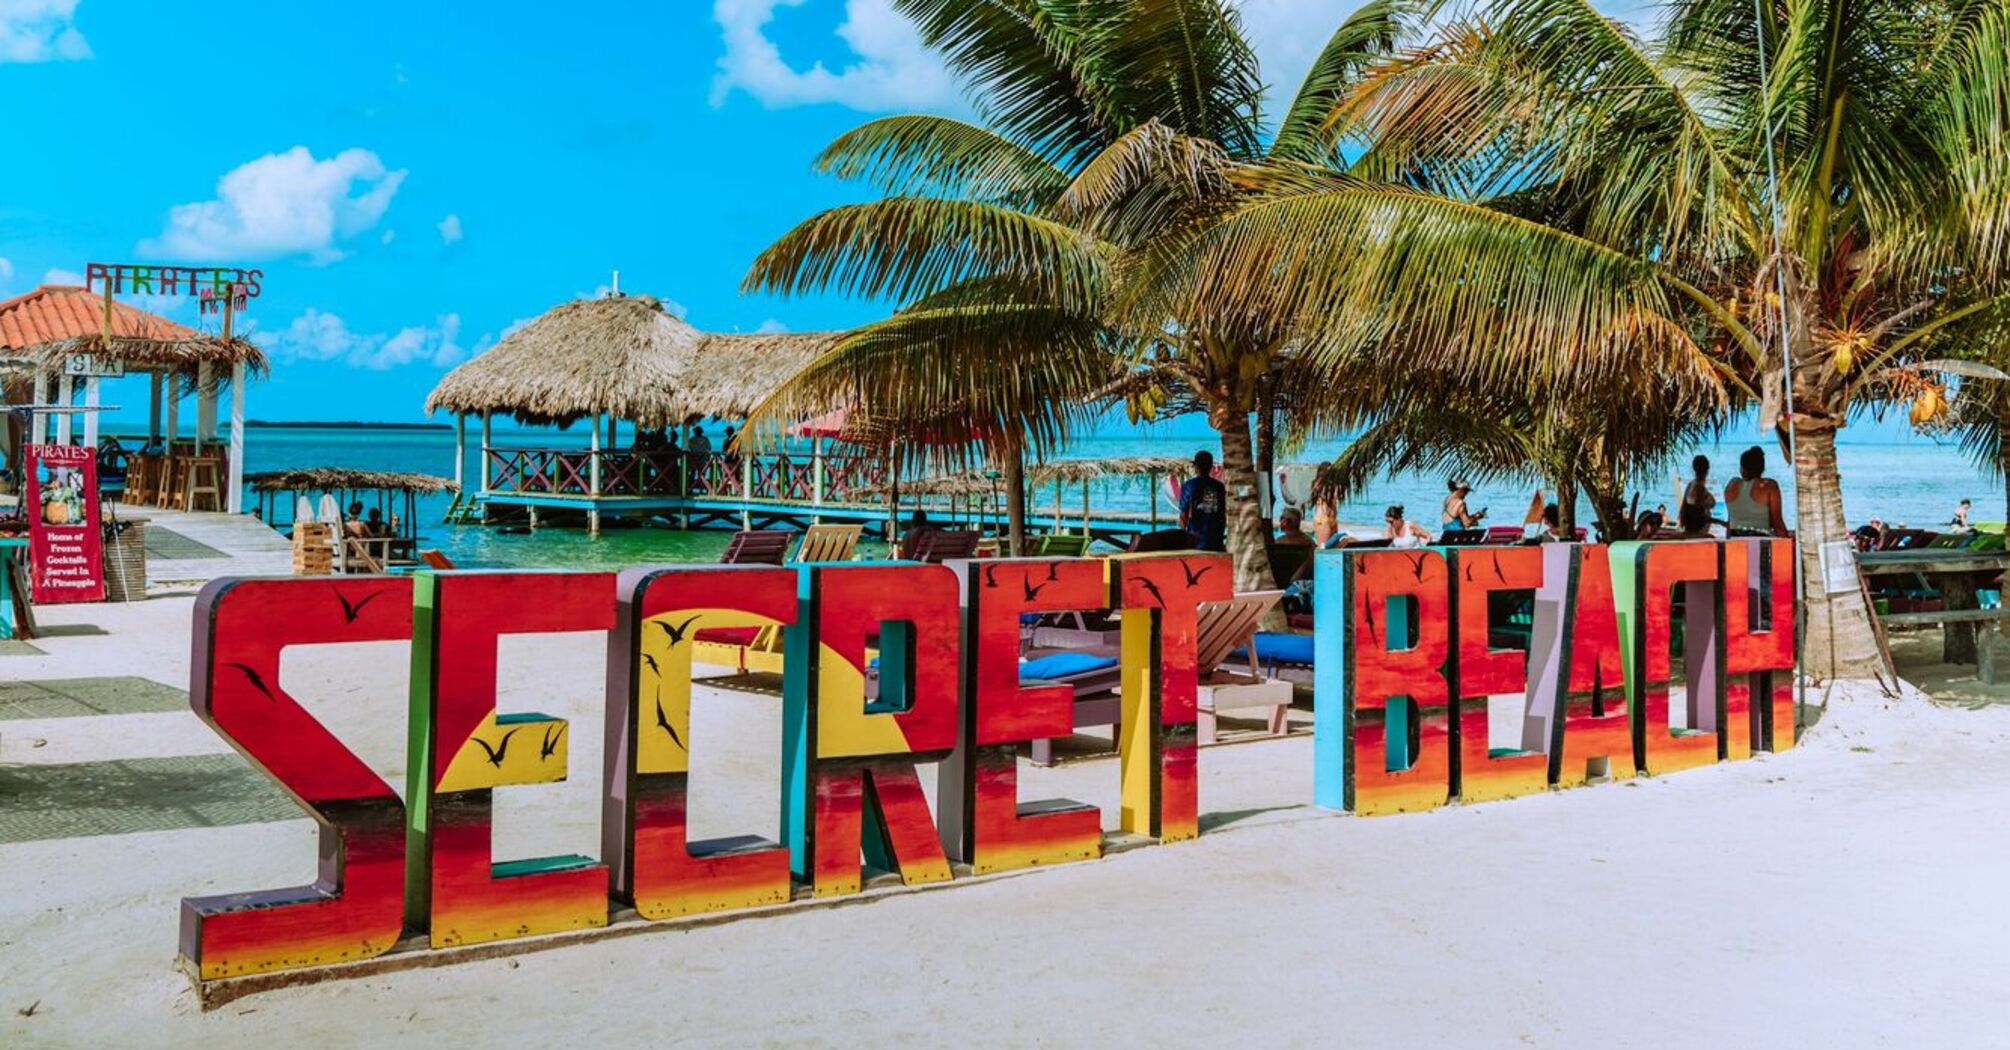 Colorful 'SECRET BEACH' sign with palm trees and beach huts in the background under a clear blue sky at Secret Beach, San Pedro, Belize